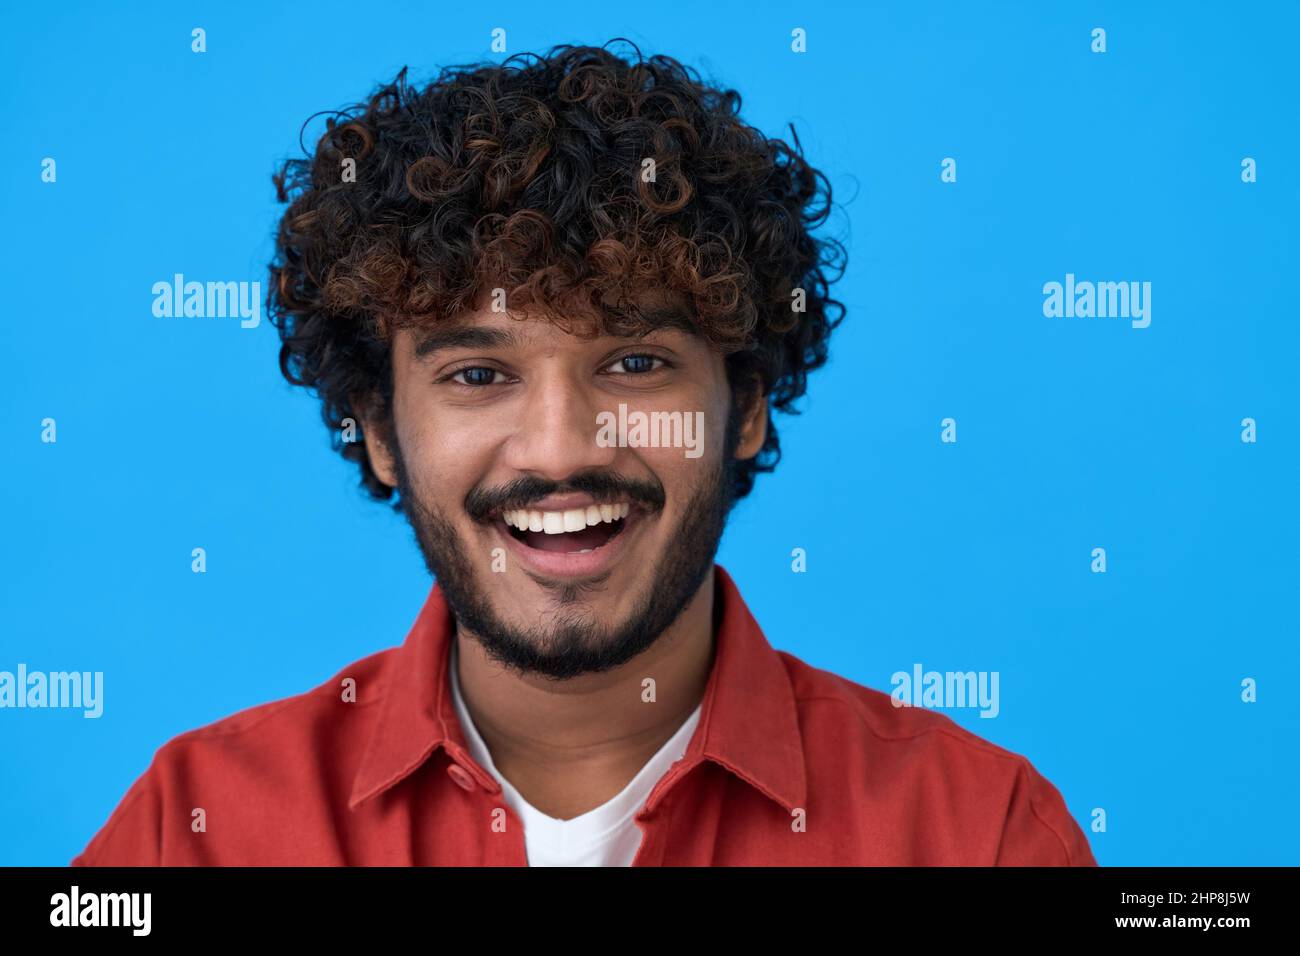 Happy young indian guy laughing isolated on blue background. Headshot portrait Stock Photo